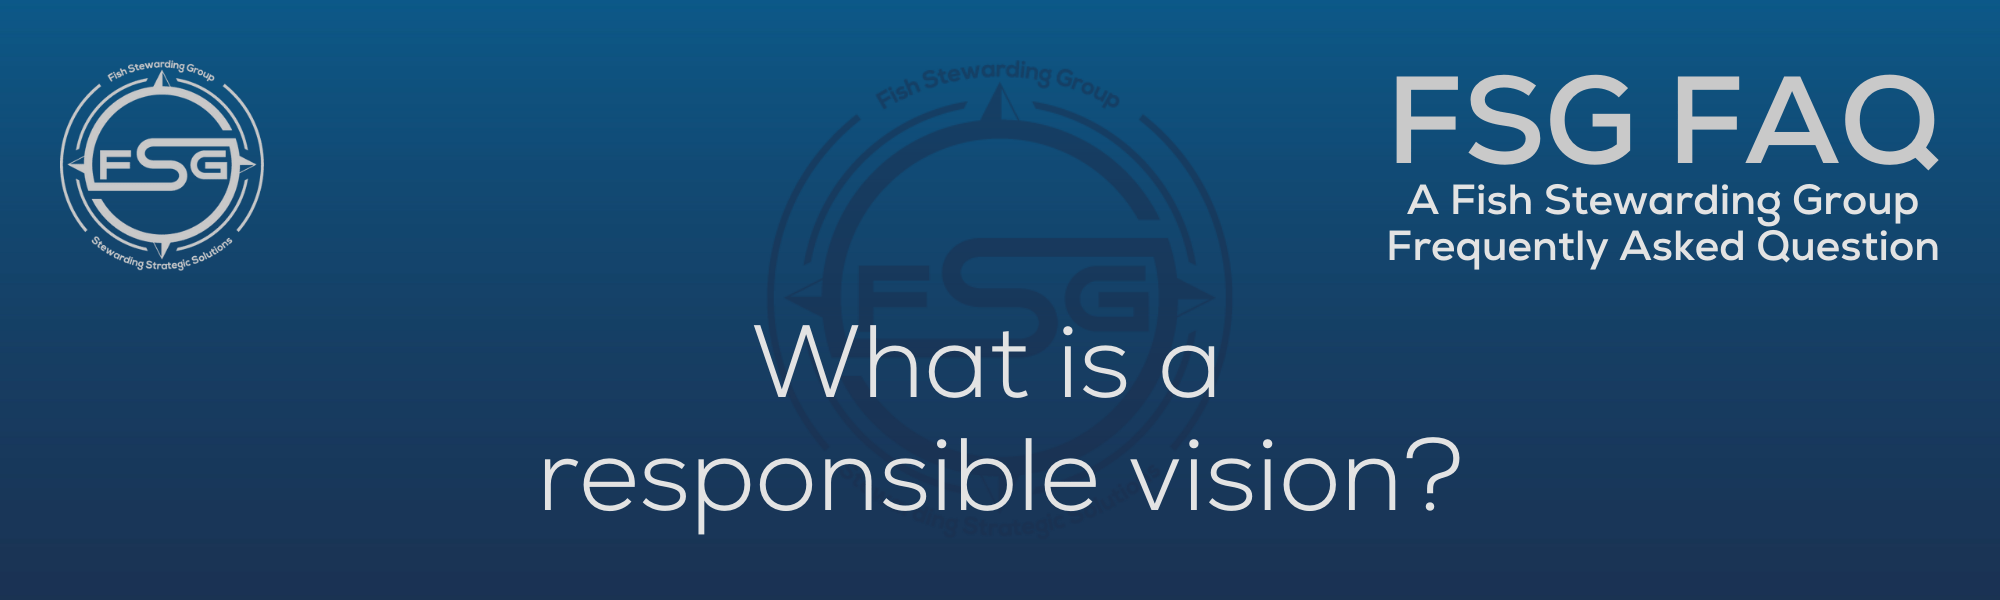 A rectangular and long thing Footer FAQ Image on the bottom of the What is a responsible vision? Page on the website. The background is a blue gradient color that goes from a dark blue on the bottom to a lighter blue on top. The text in lower center of the image in a light gray text that reads: What is a responsible vision? The text in gray in the upper right corner reads: FSG FAQ. Right beneath that is more gray text in a smaller font that reads: A Fish Stewarding Group Frequently Asked Question. On the upper left side is the FSG Logo in gray. The logo has the letters FSG in the middle with a circle with four pointed arrows facing north, south, east and west with the S connected to that circle. Four rounded lines make the next circle of the circle and the last layer is a thin circle with the text on the Bottom that reads Stewarding Strategist Solutions and on top, the text reads Fish Stewarding Group. And Lastly in the center background of the image is a watermarked FSG logo, faded in blue, in the background.